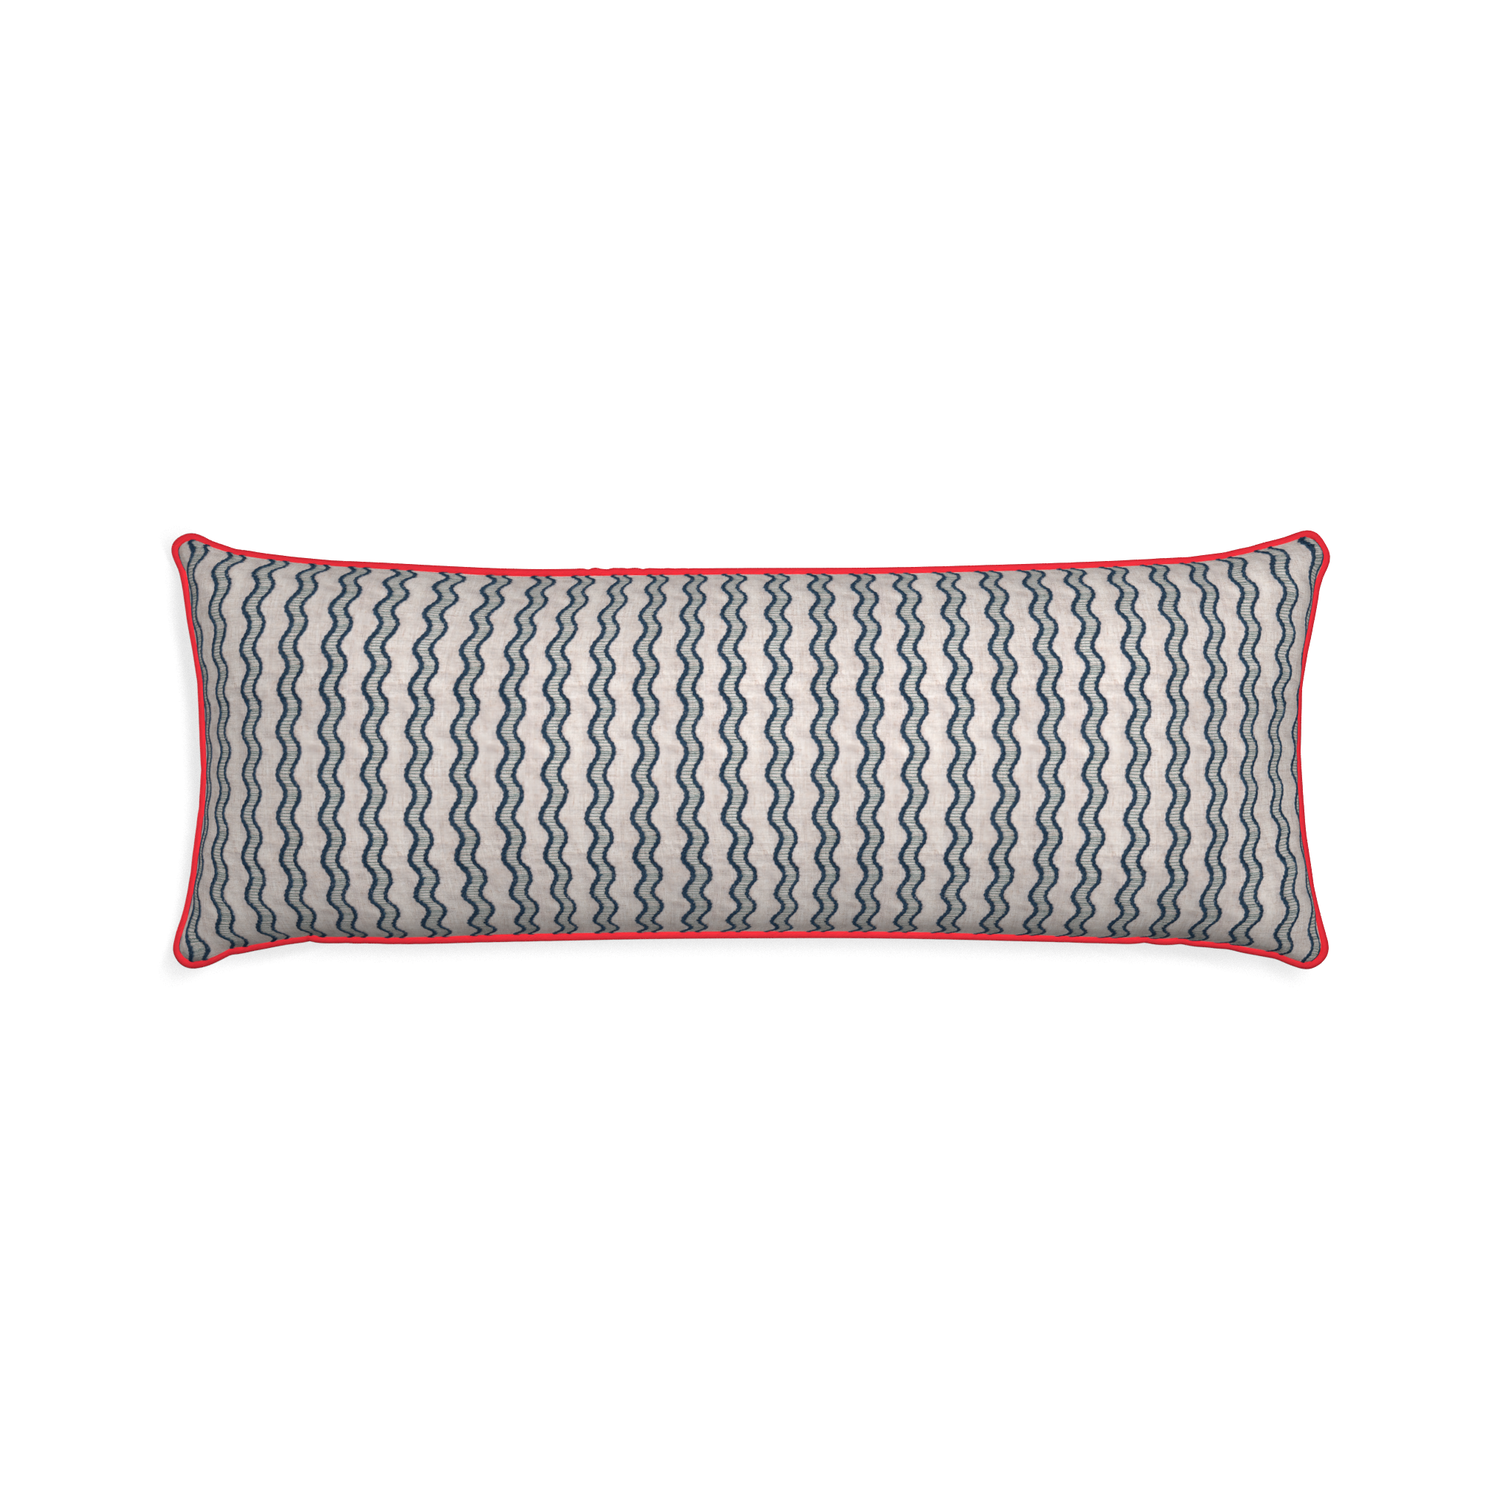 Xl-lumbar beatrice custom embroidered wavepillow with cherry piping on white background